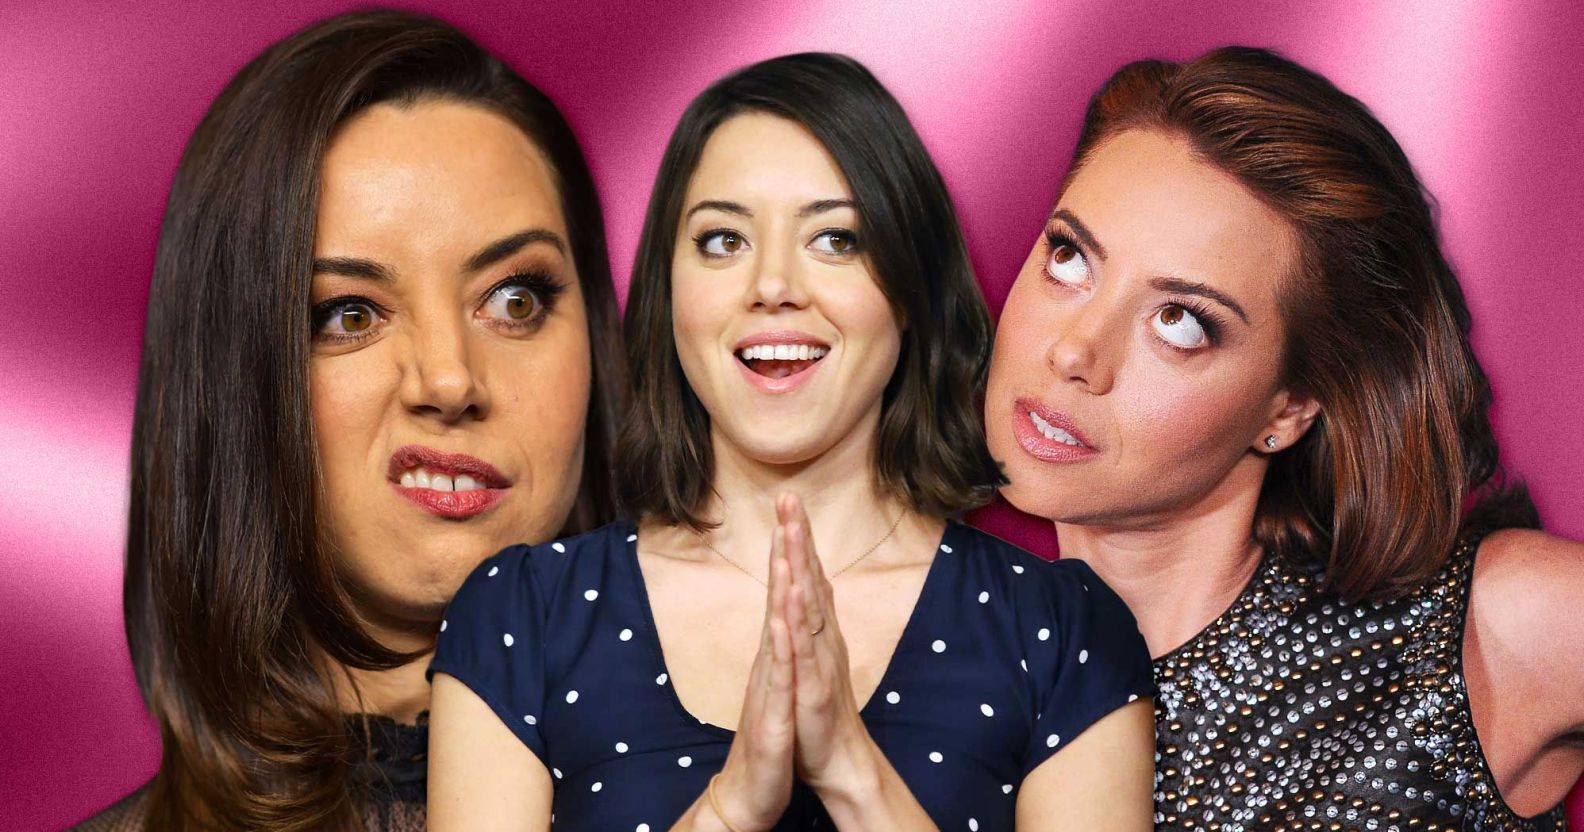 Aubrey Plaza: The White Lotus star's best comedic roles